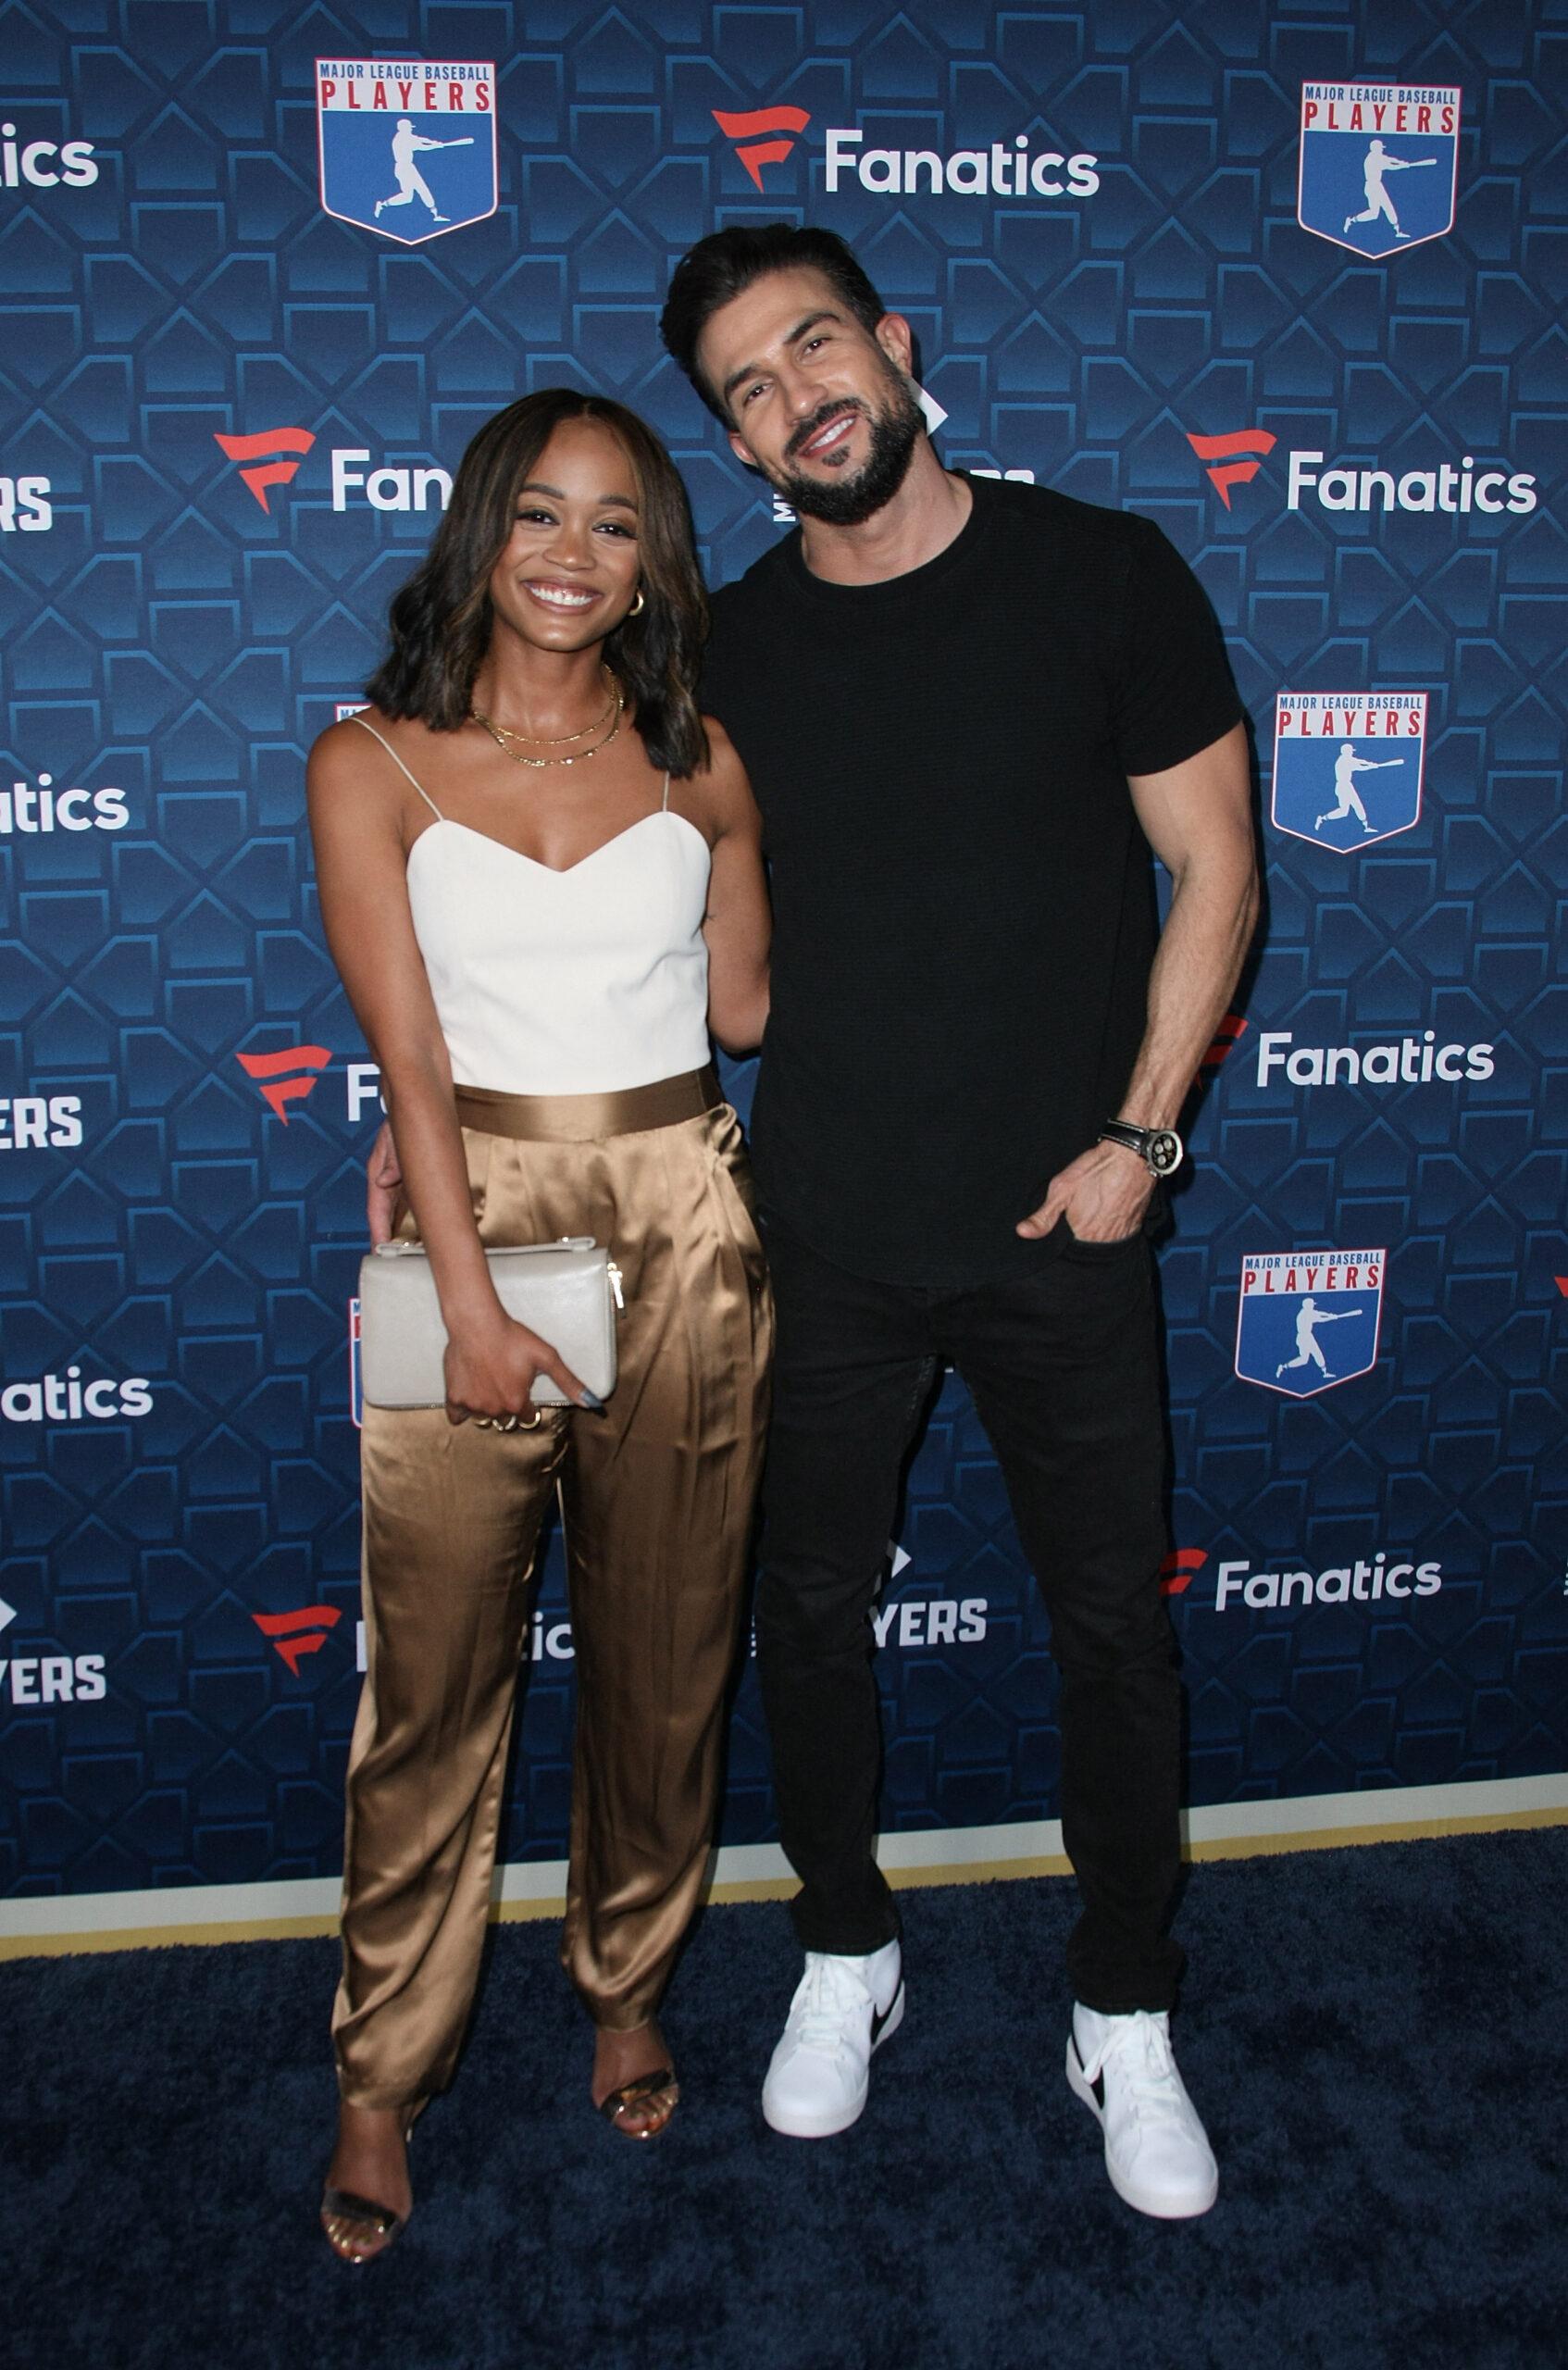 Rachel Lindsay and Bryan Abasolo at The Players Party hosted by MLBPA and Fanatics